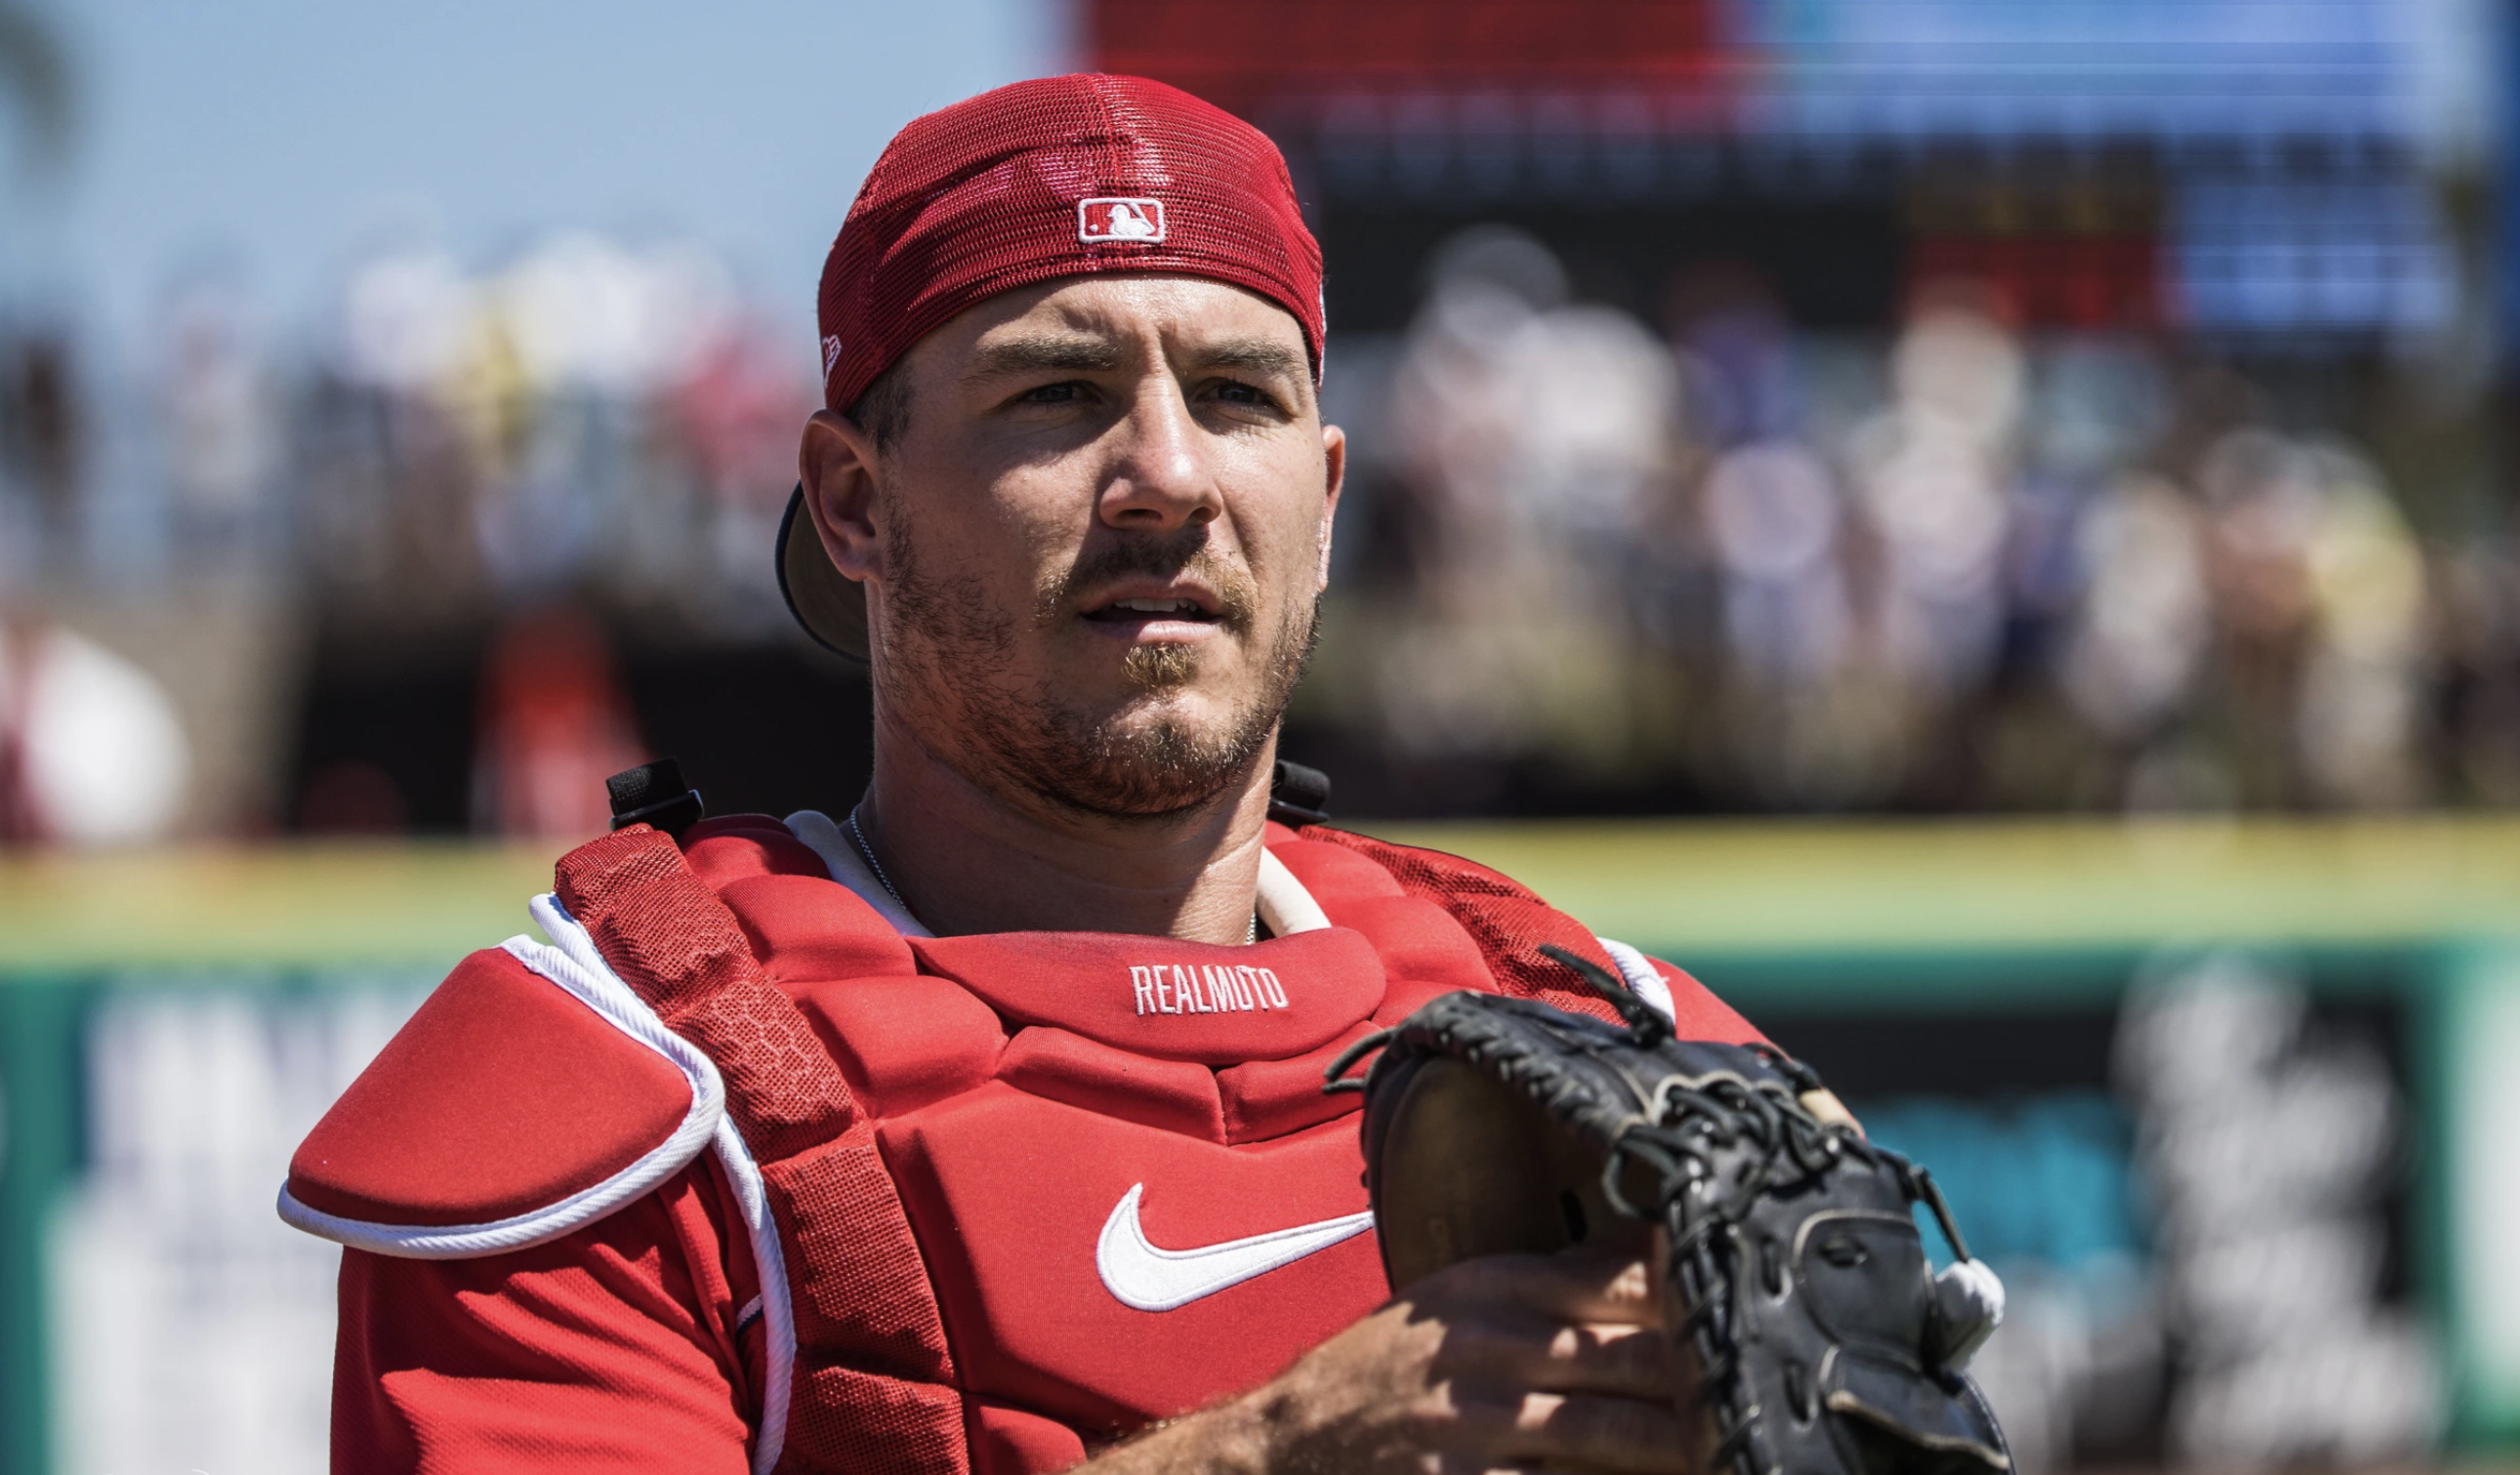 PHILS JT REALMUTO CATCHES IN SPRING TRAINING WEARING A CAST